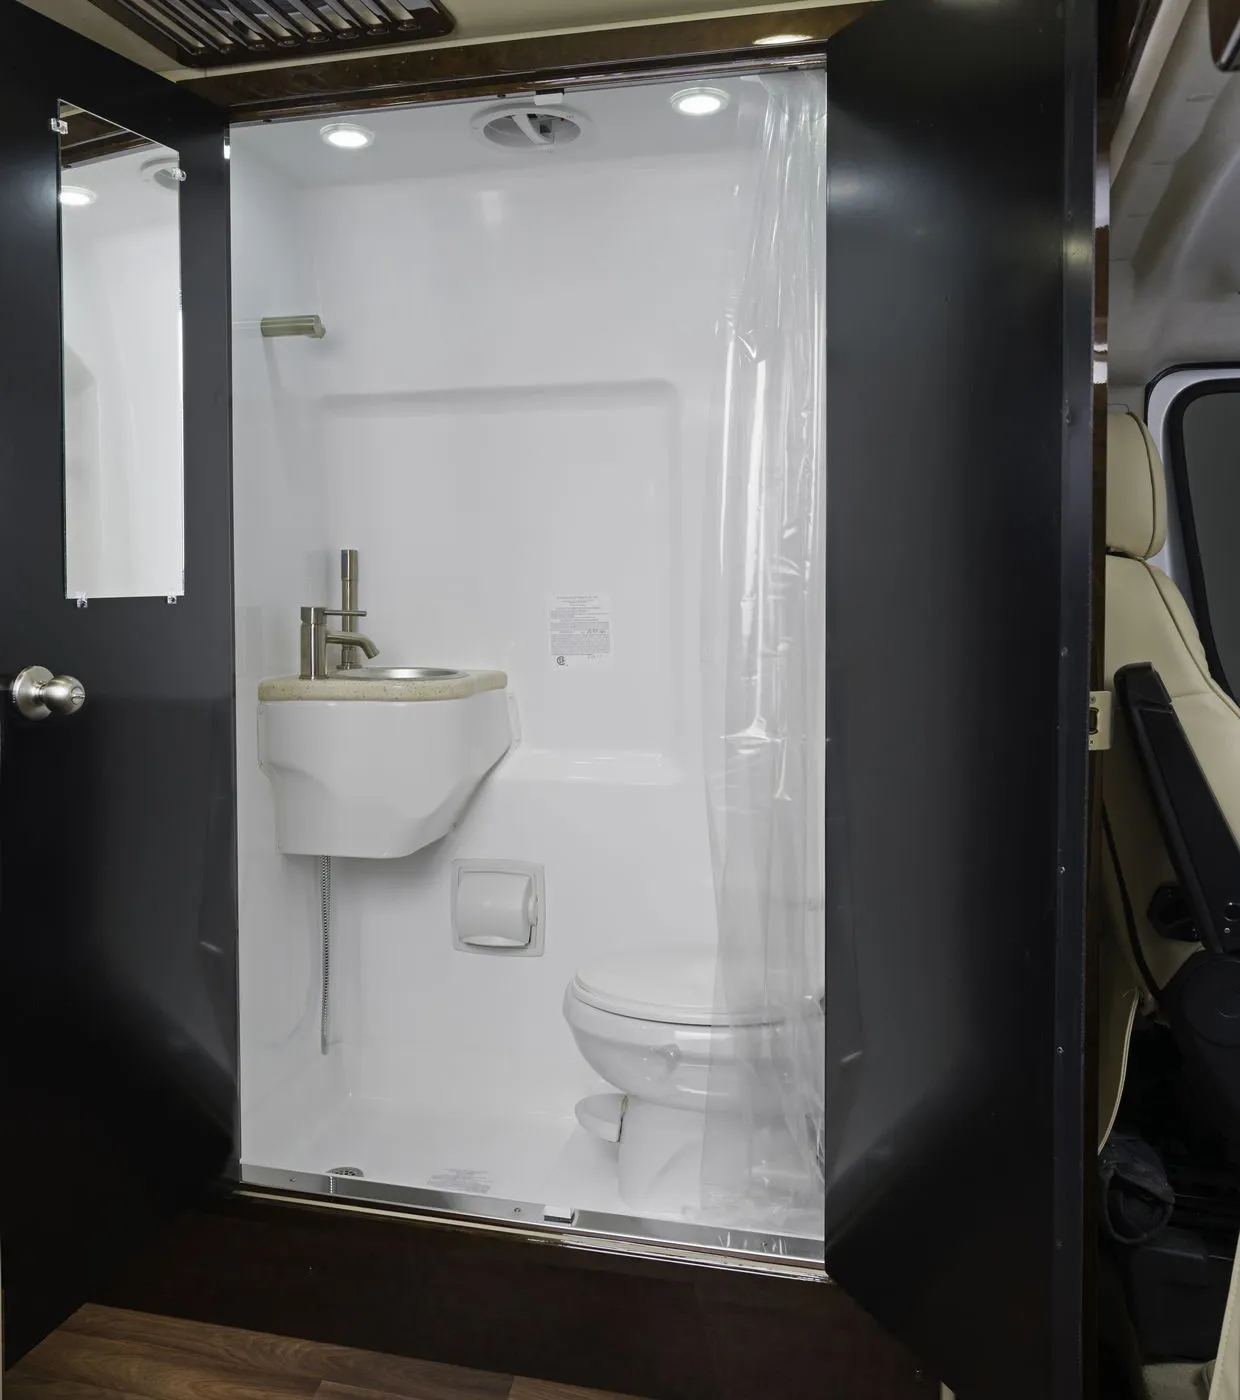 The Smallest Rvs With Shower And Toilet, Small Rv Bathtub